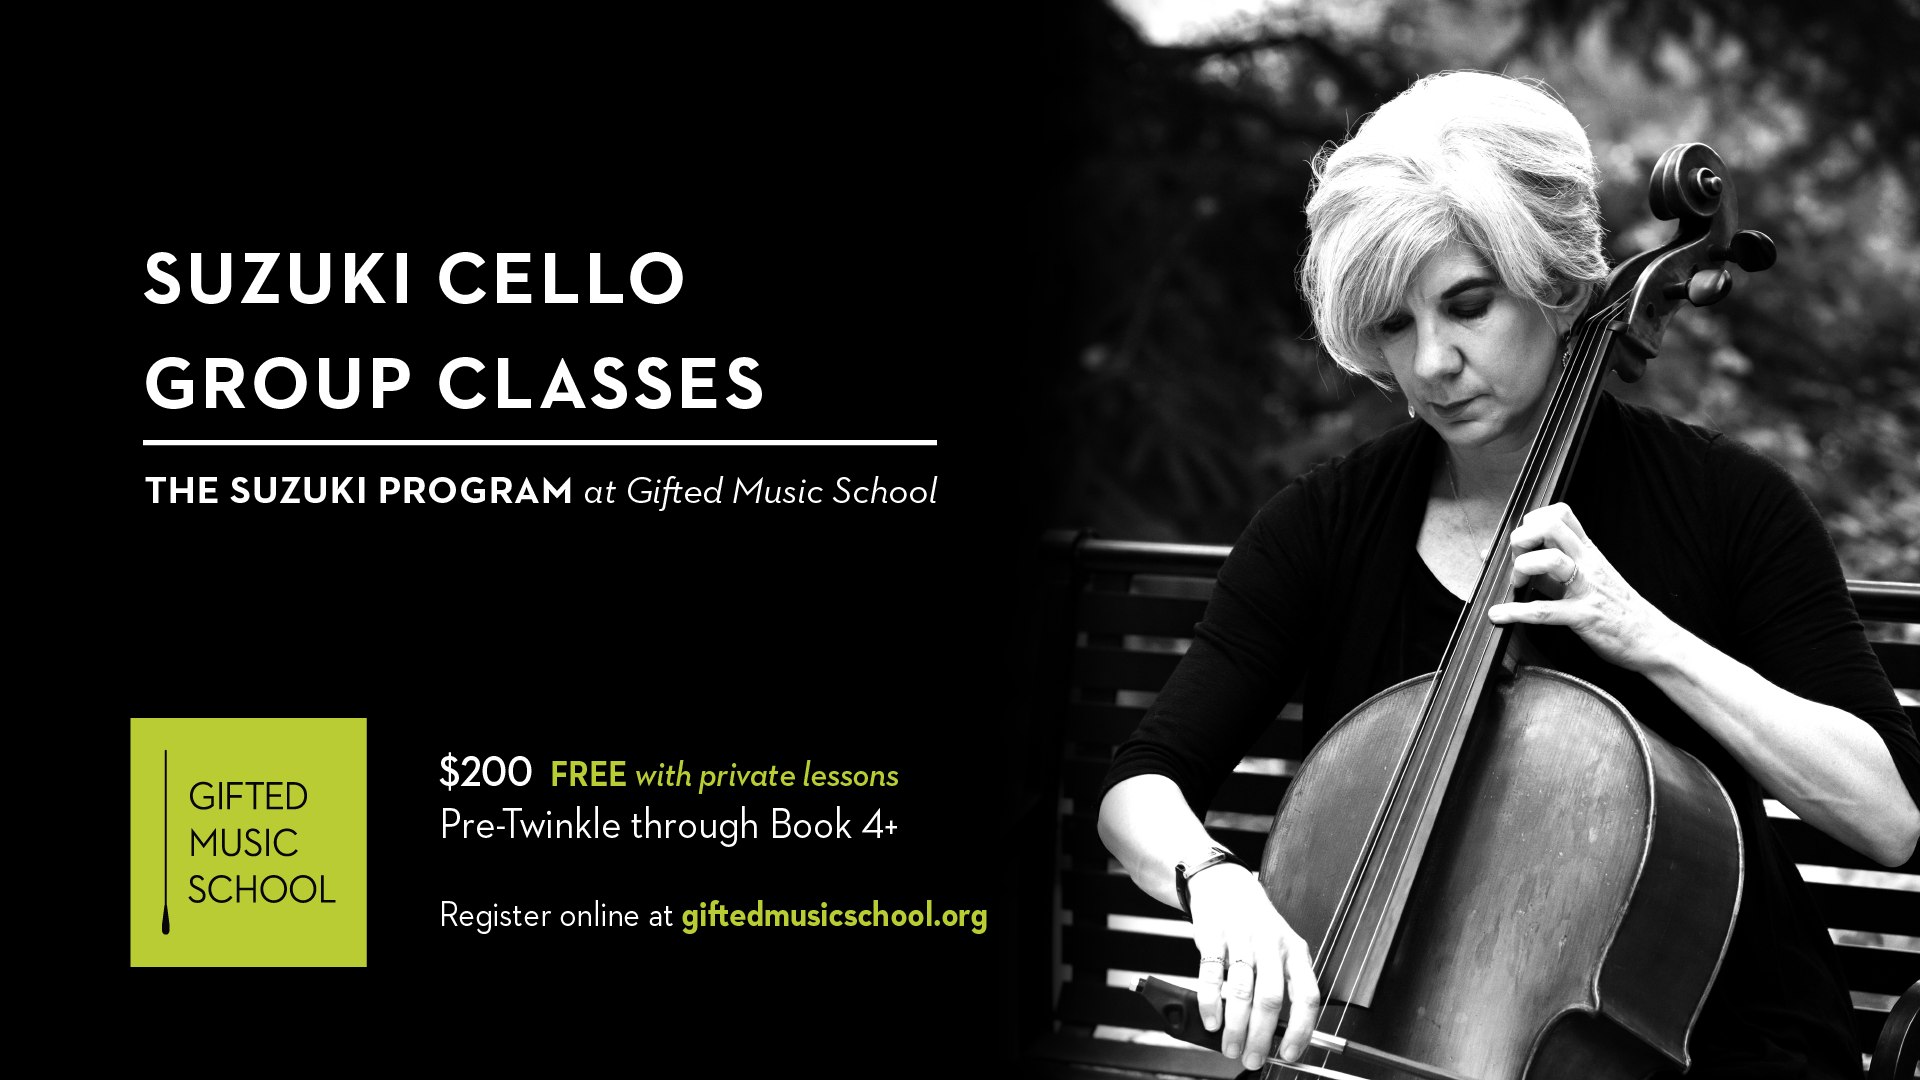 Gifted Music School Suzuki Cello Group Class Advertisement with Katherine Baird playing cello